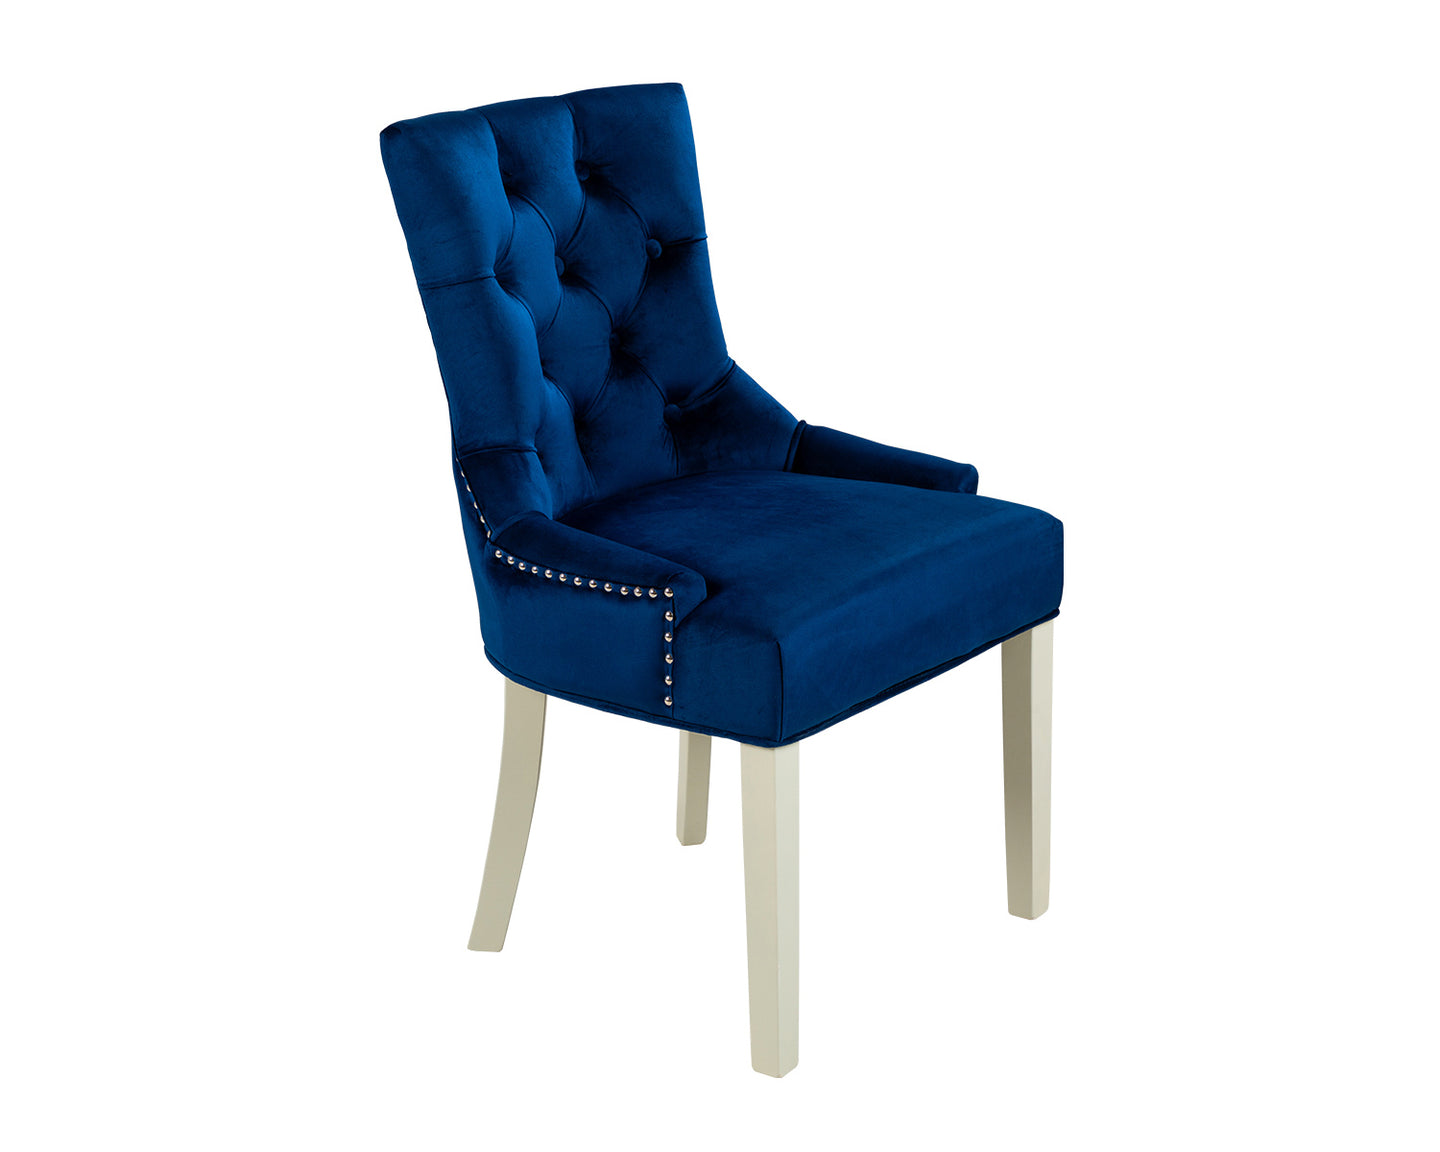 Verona Dining Chair in Royal Blue Velvet with Chrome Knocker and Grey Legs